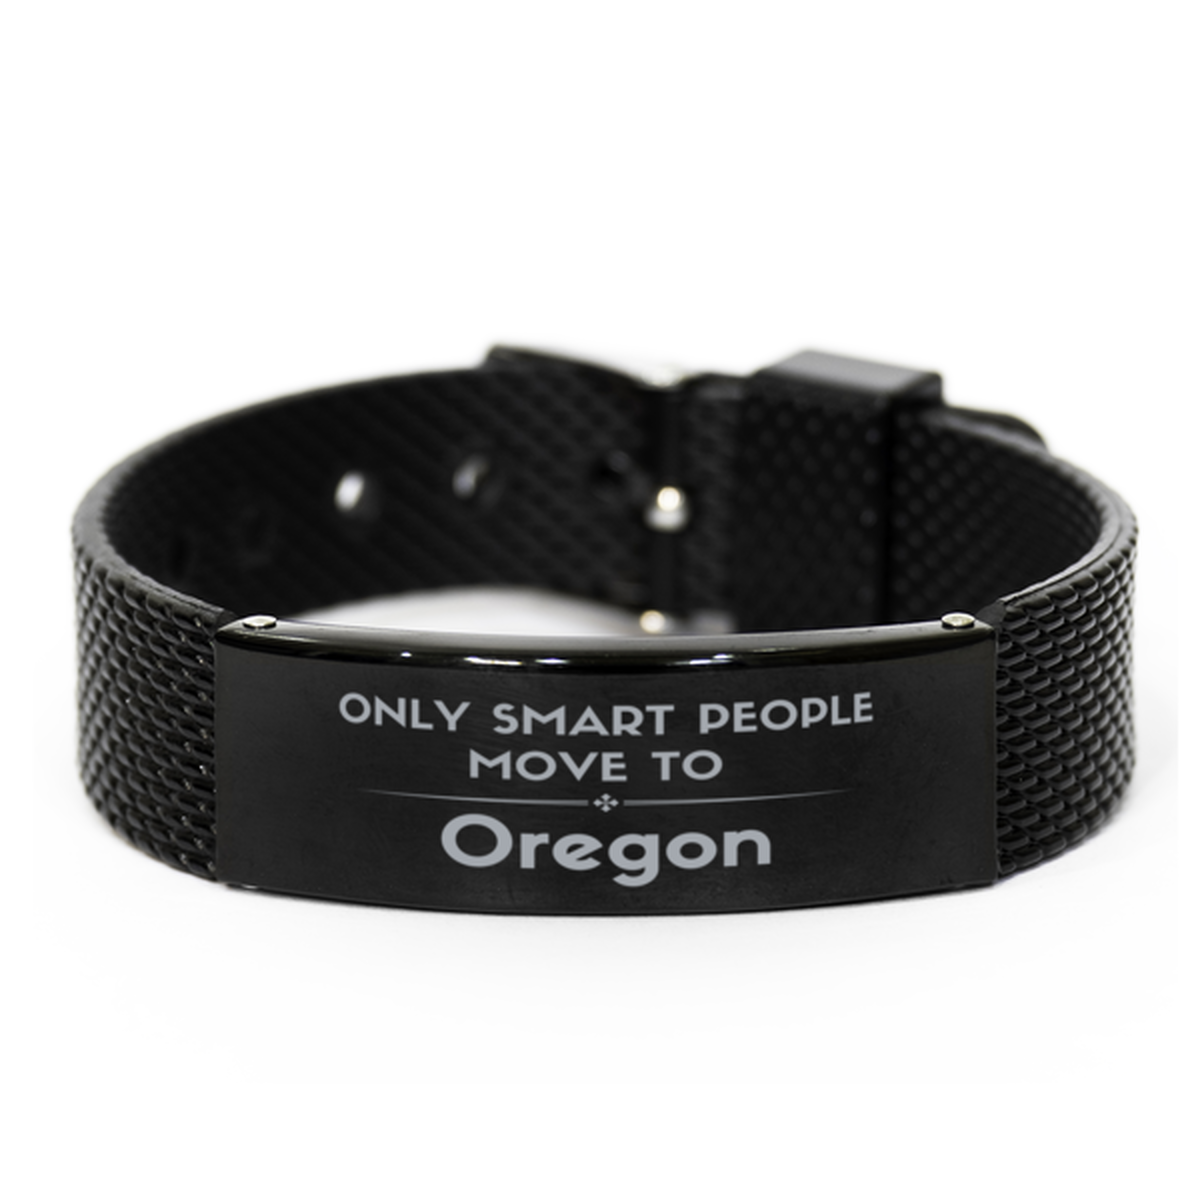 Only smart people move to Oregon Black Shark Mesh Bracelet, Gag Gifts For Oregon, Move to Oregon Gifts for Friends Coworker Funny Saying Quote